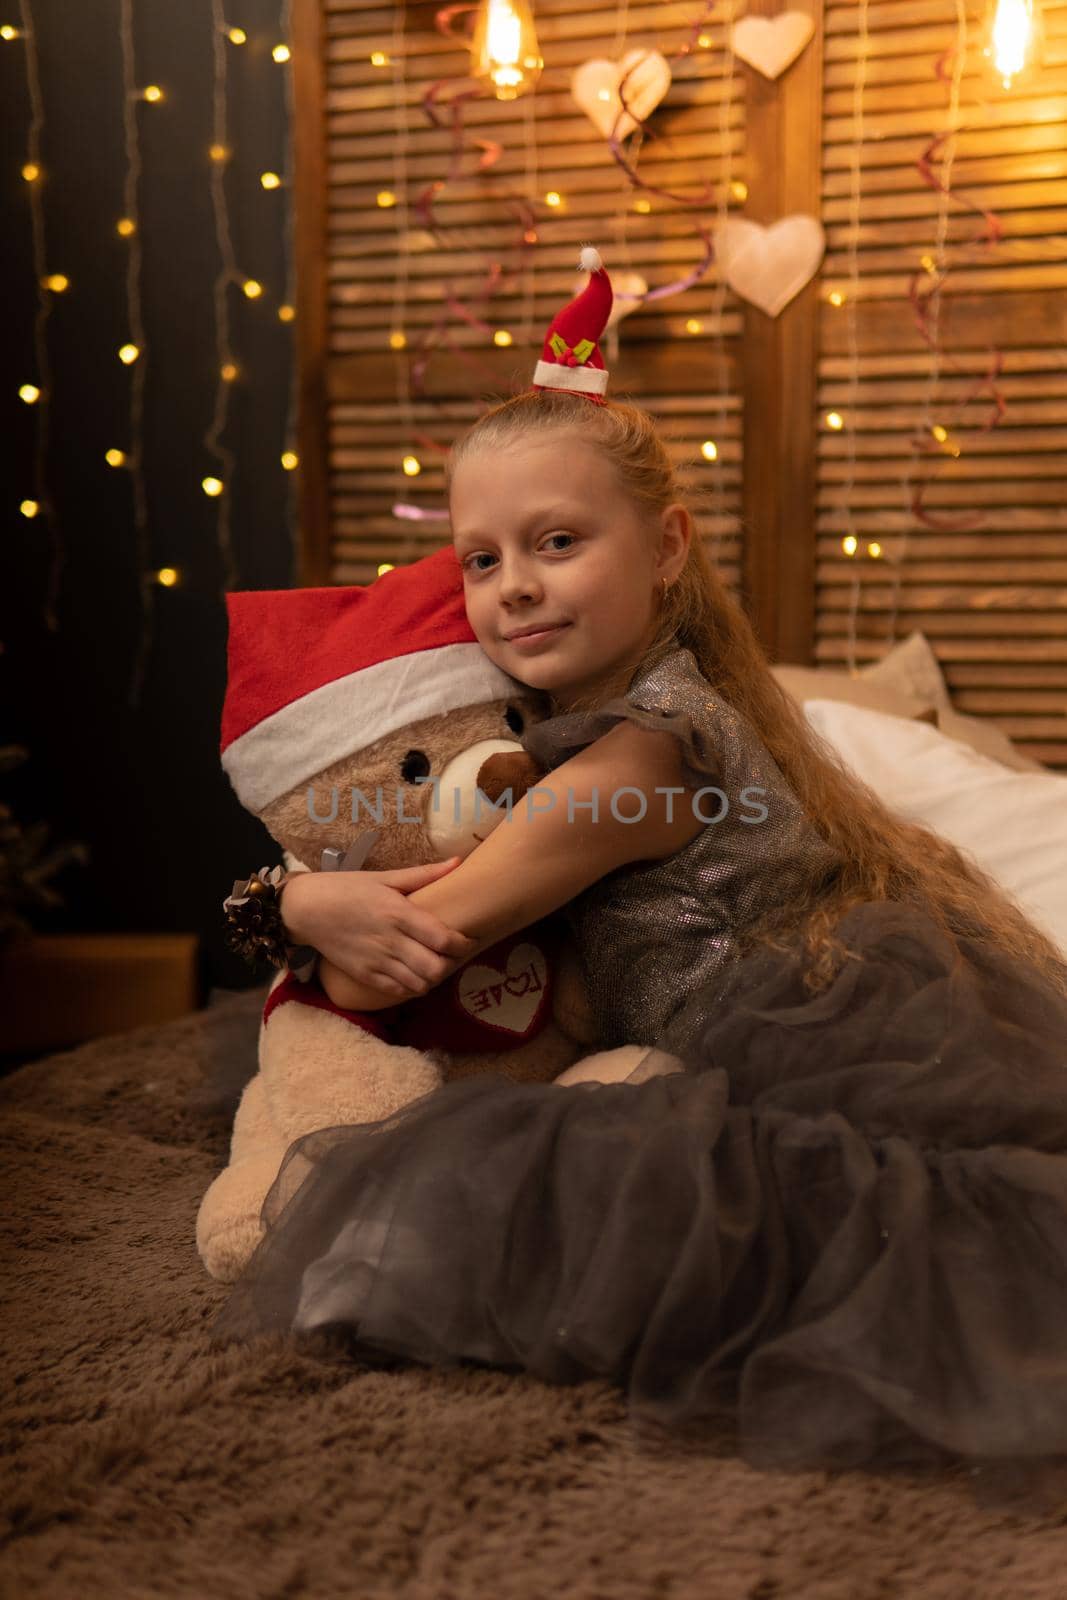 A girl hugs a bear toy in a Christmas cap bear Christmas kid girl cute, from people young in comfort sitting room, adorable joyful. Bedroom woman holding, hug wake the concept of kindness